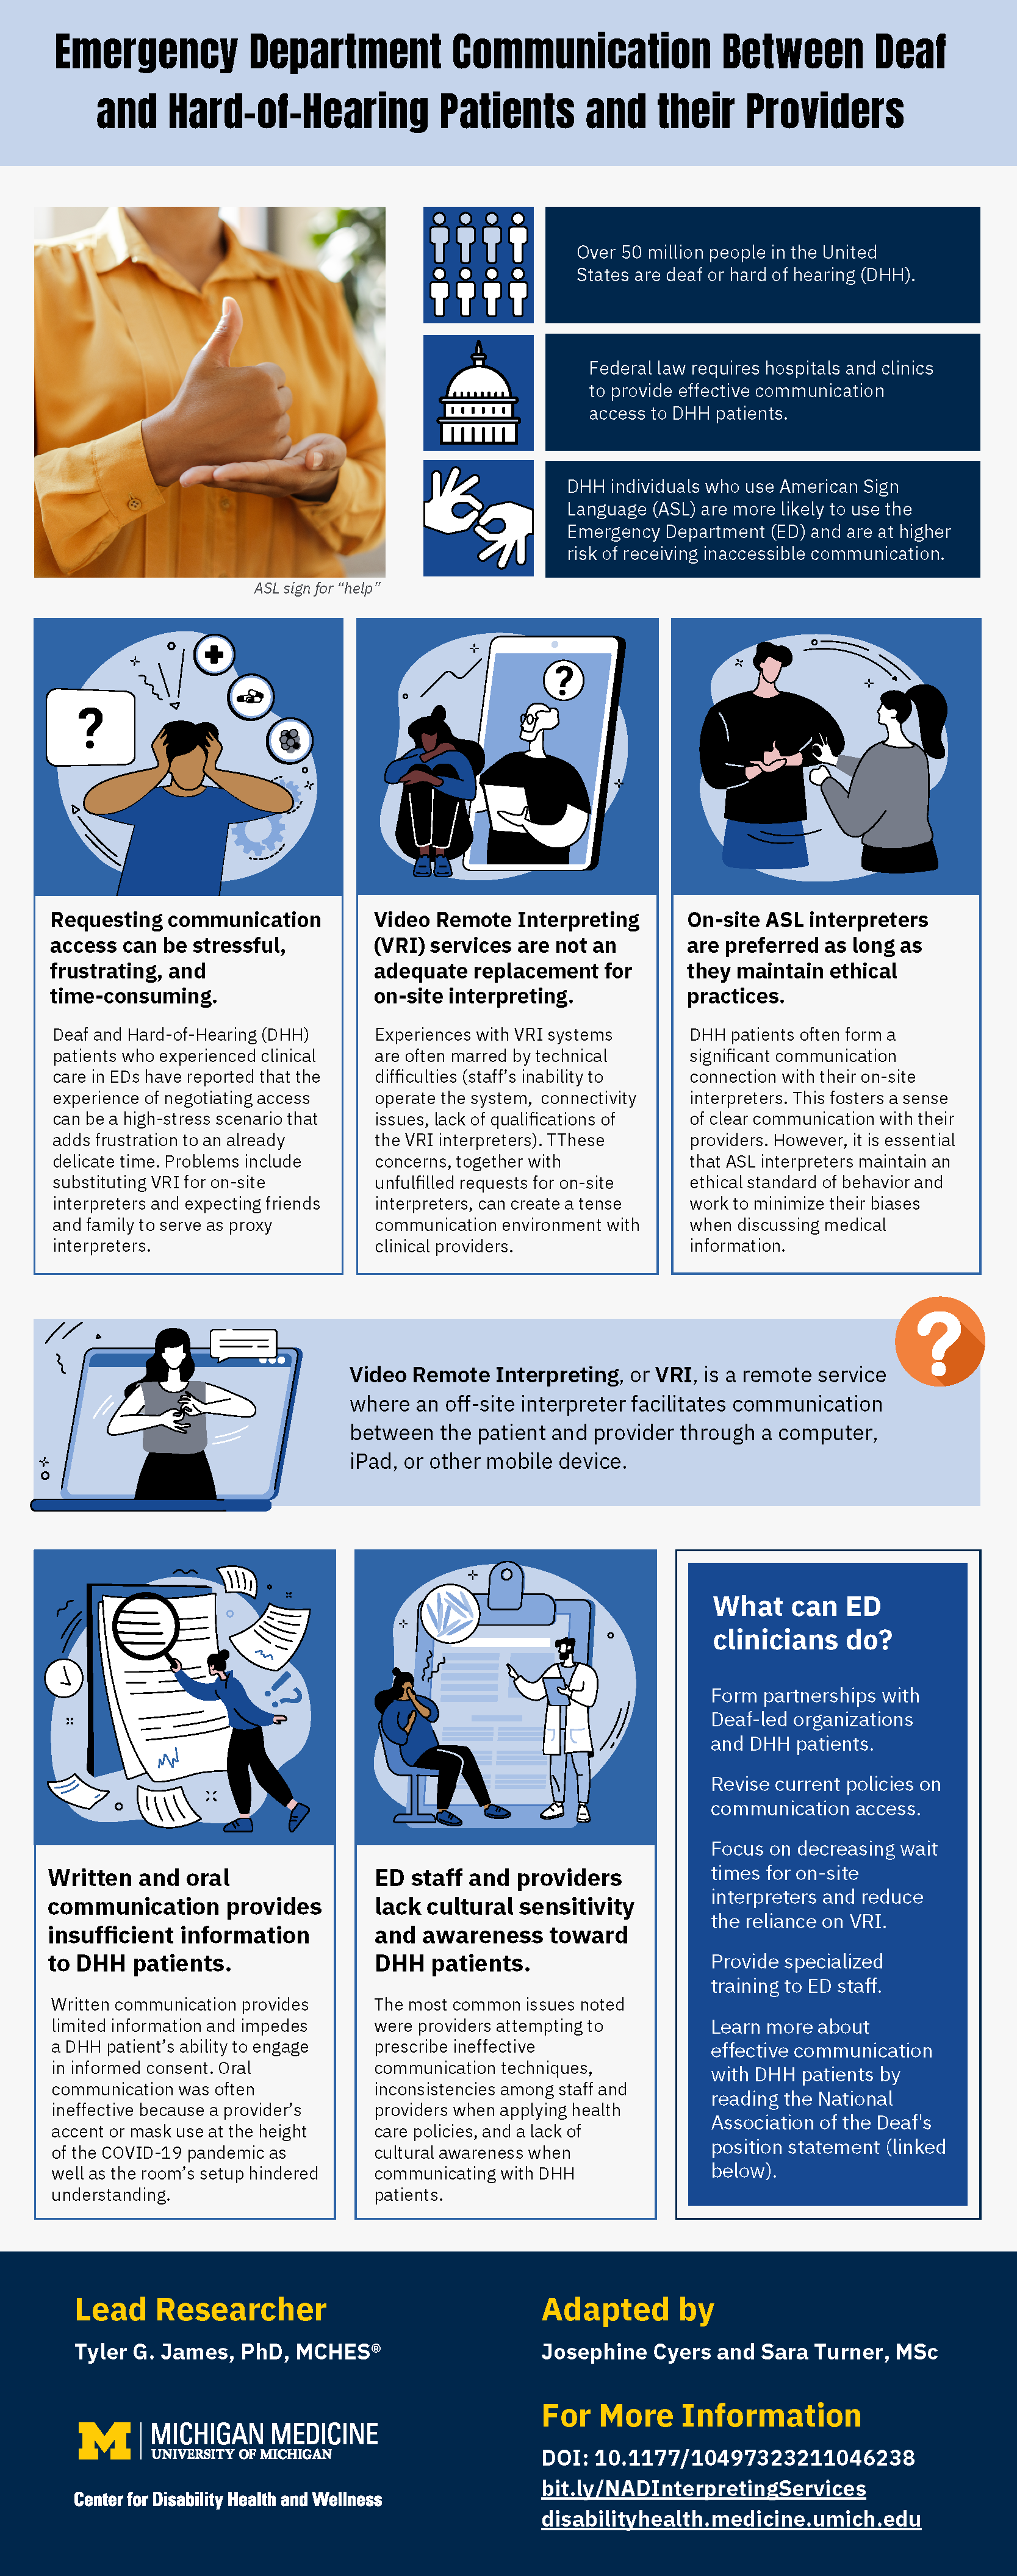 Infographic on Emergency Department Communication Between Deaf and Hard-of-Hearing Patients and Their Providers